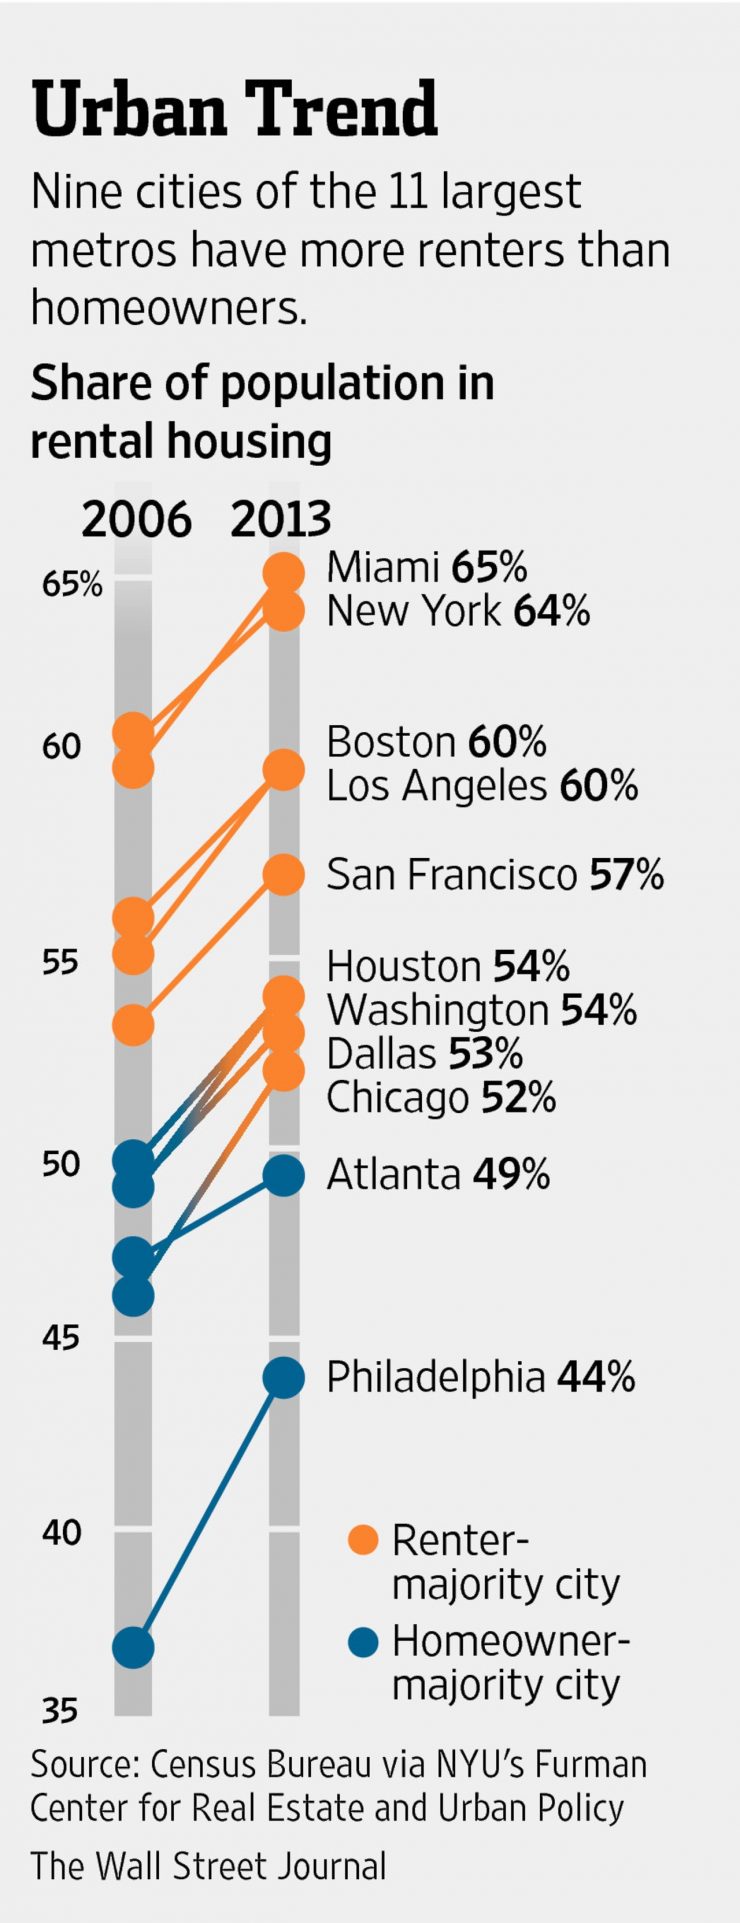 The Urban Trend - Nine cities of the 11 largest metros have more renters than homeowners